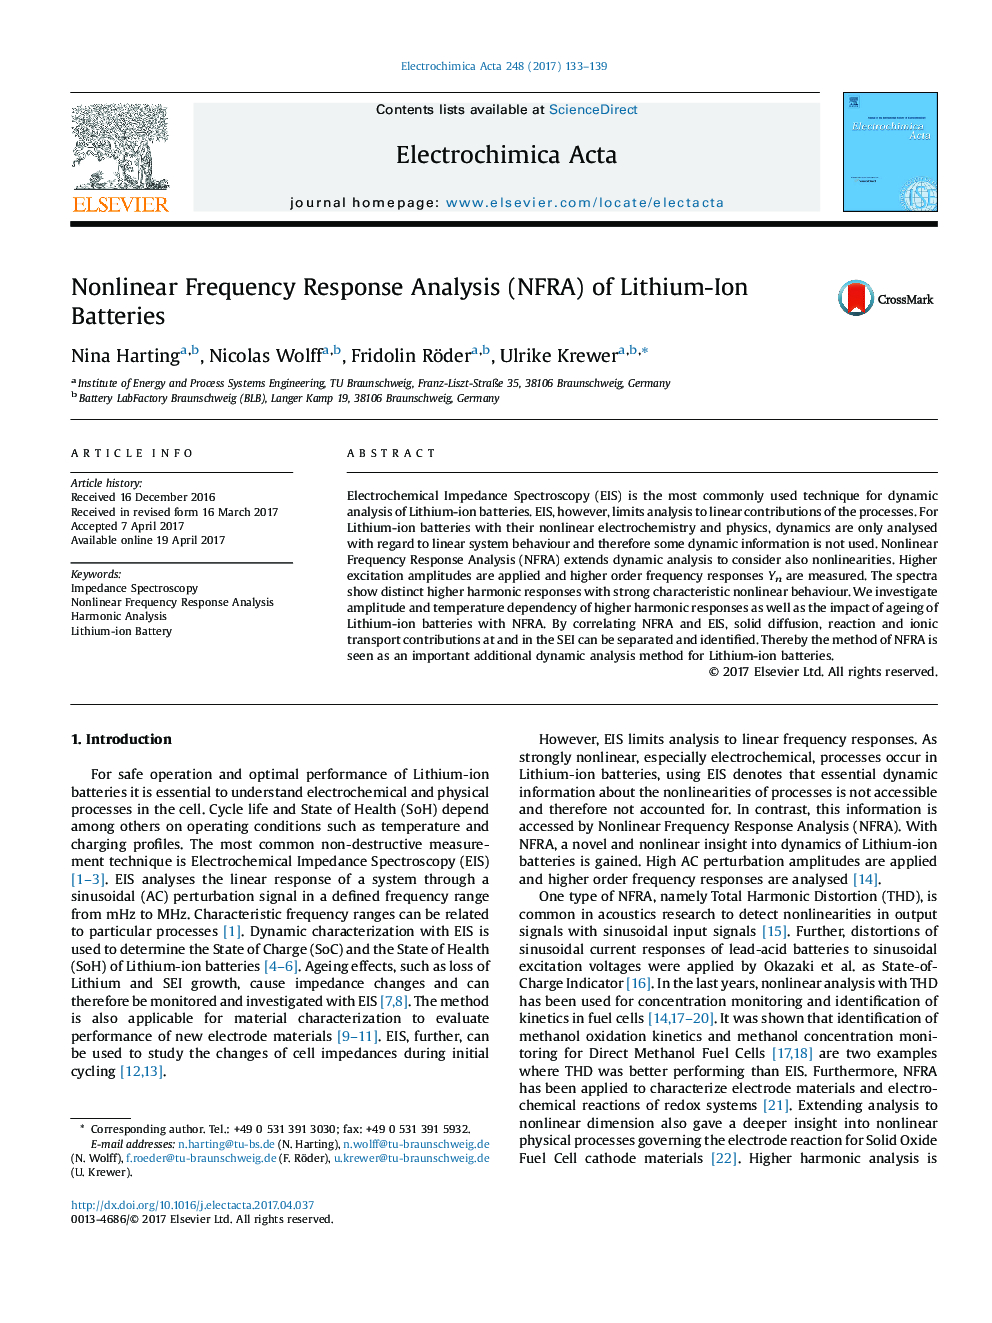 Nonlinear Frequency Response Analysis (NFRA) of Lithium-Ion Batteries